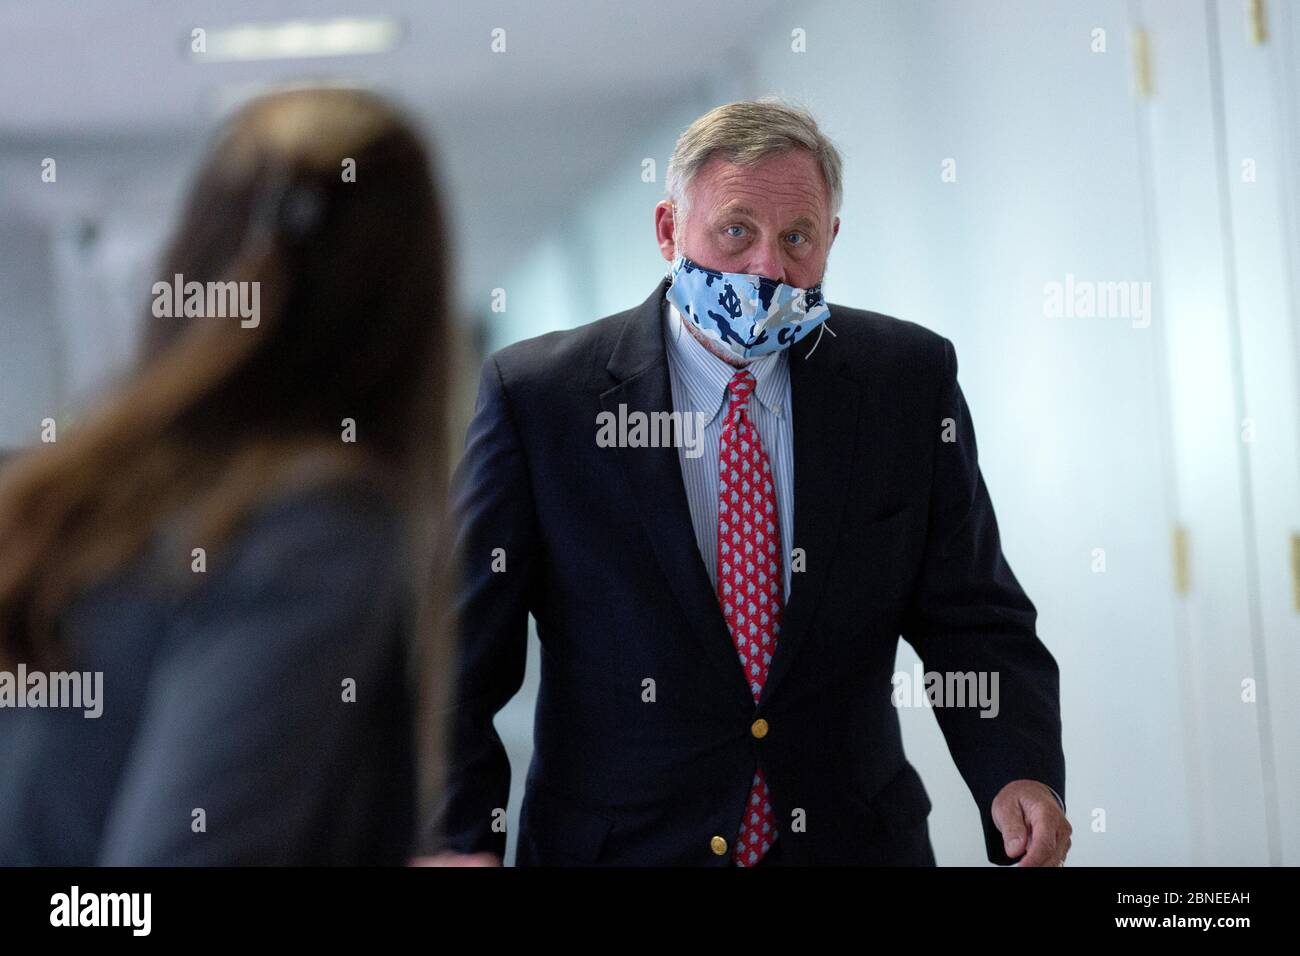 United States Senator Richard Burr (Democrat of Nort Carolina) arrives to GOP Senate Luncheons at the Hart Senate Office Building in Washington, DC, U.S., on Thursday, May 14, 2020. Burr stepped down as chairman of the Senate Intelligence Committee after the FBI seized his phone to further investigate insider trading allegations. Credit: Stefani Reynolds/CNP /MediaPunch Stock Photo